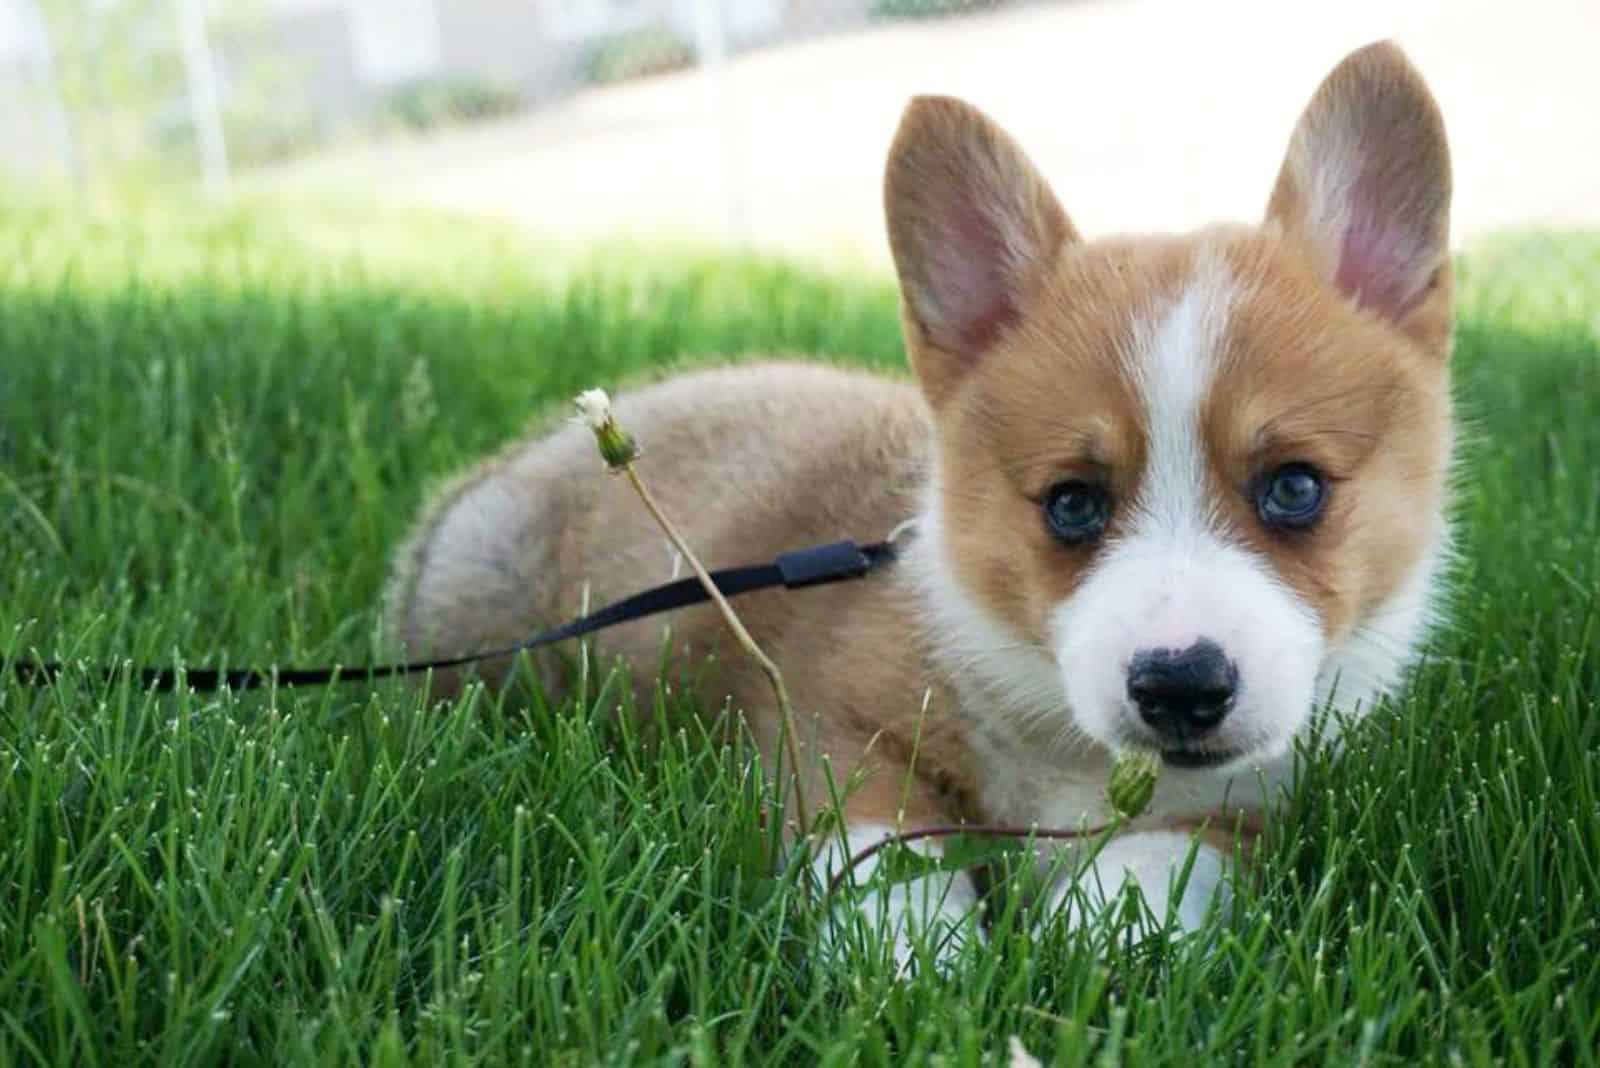 Teacup Corgi lies and rests in the grass